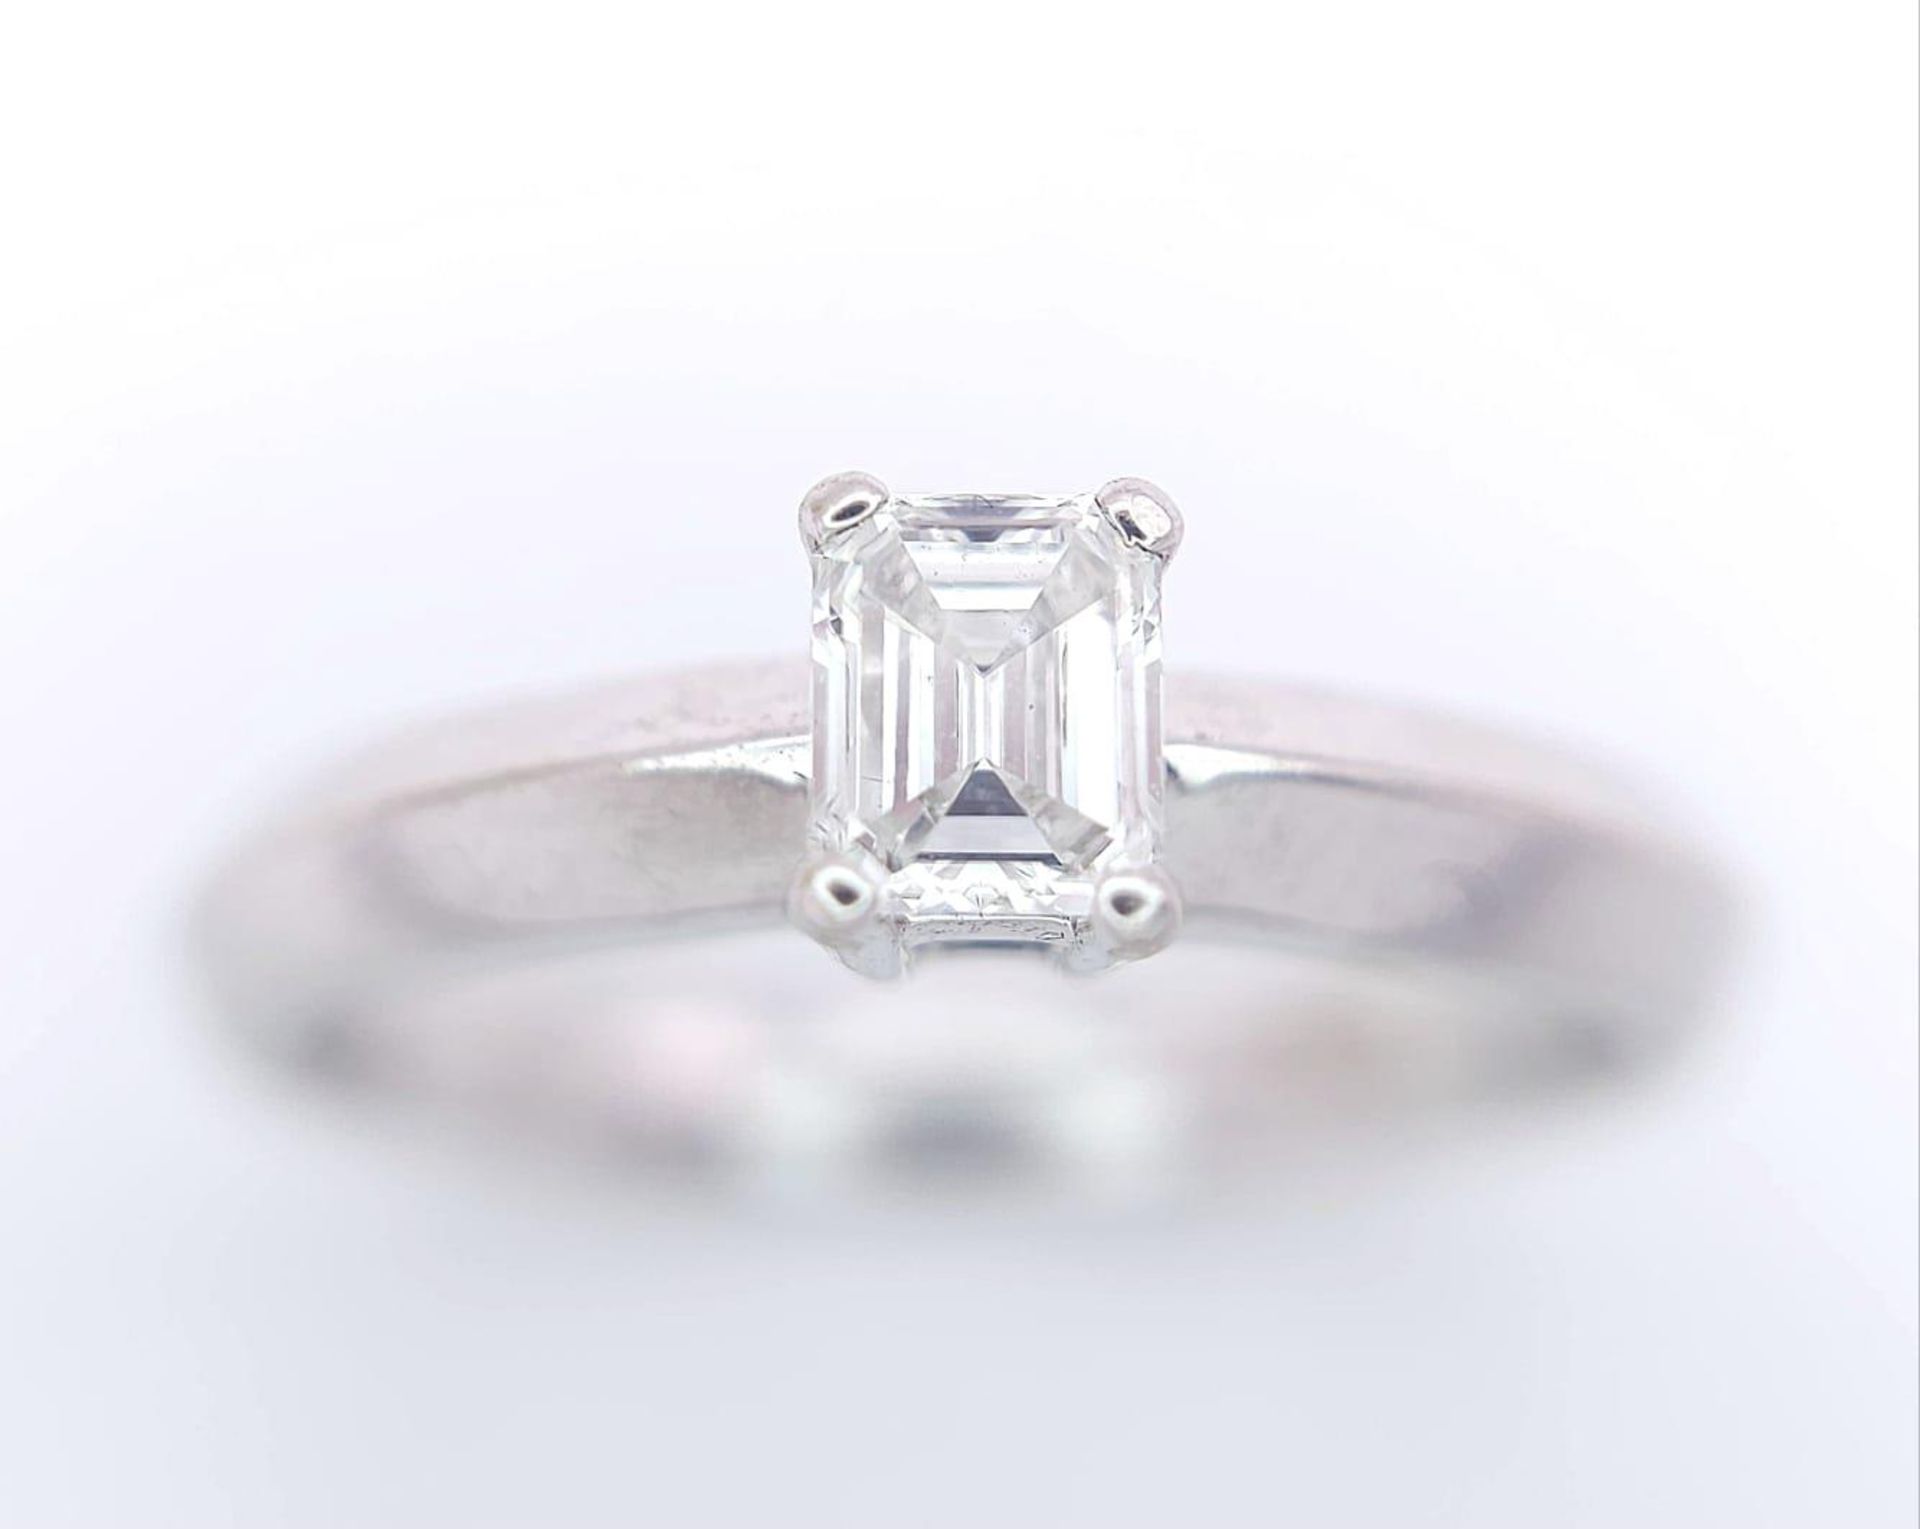 AN 18K WHITE GOLD EMERALD CUT DIAMOND SOLITAIRE RING. 0.34CT. 3.6G. SIZE N.